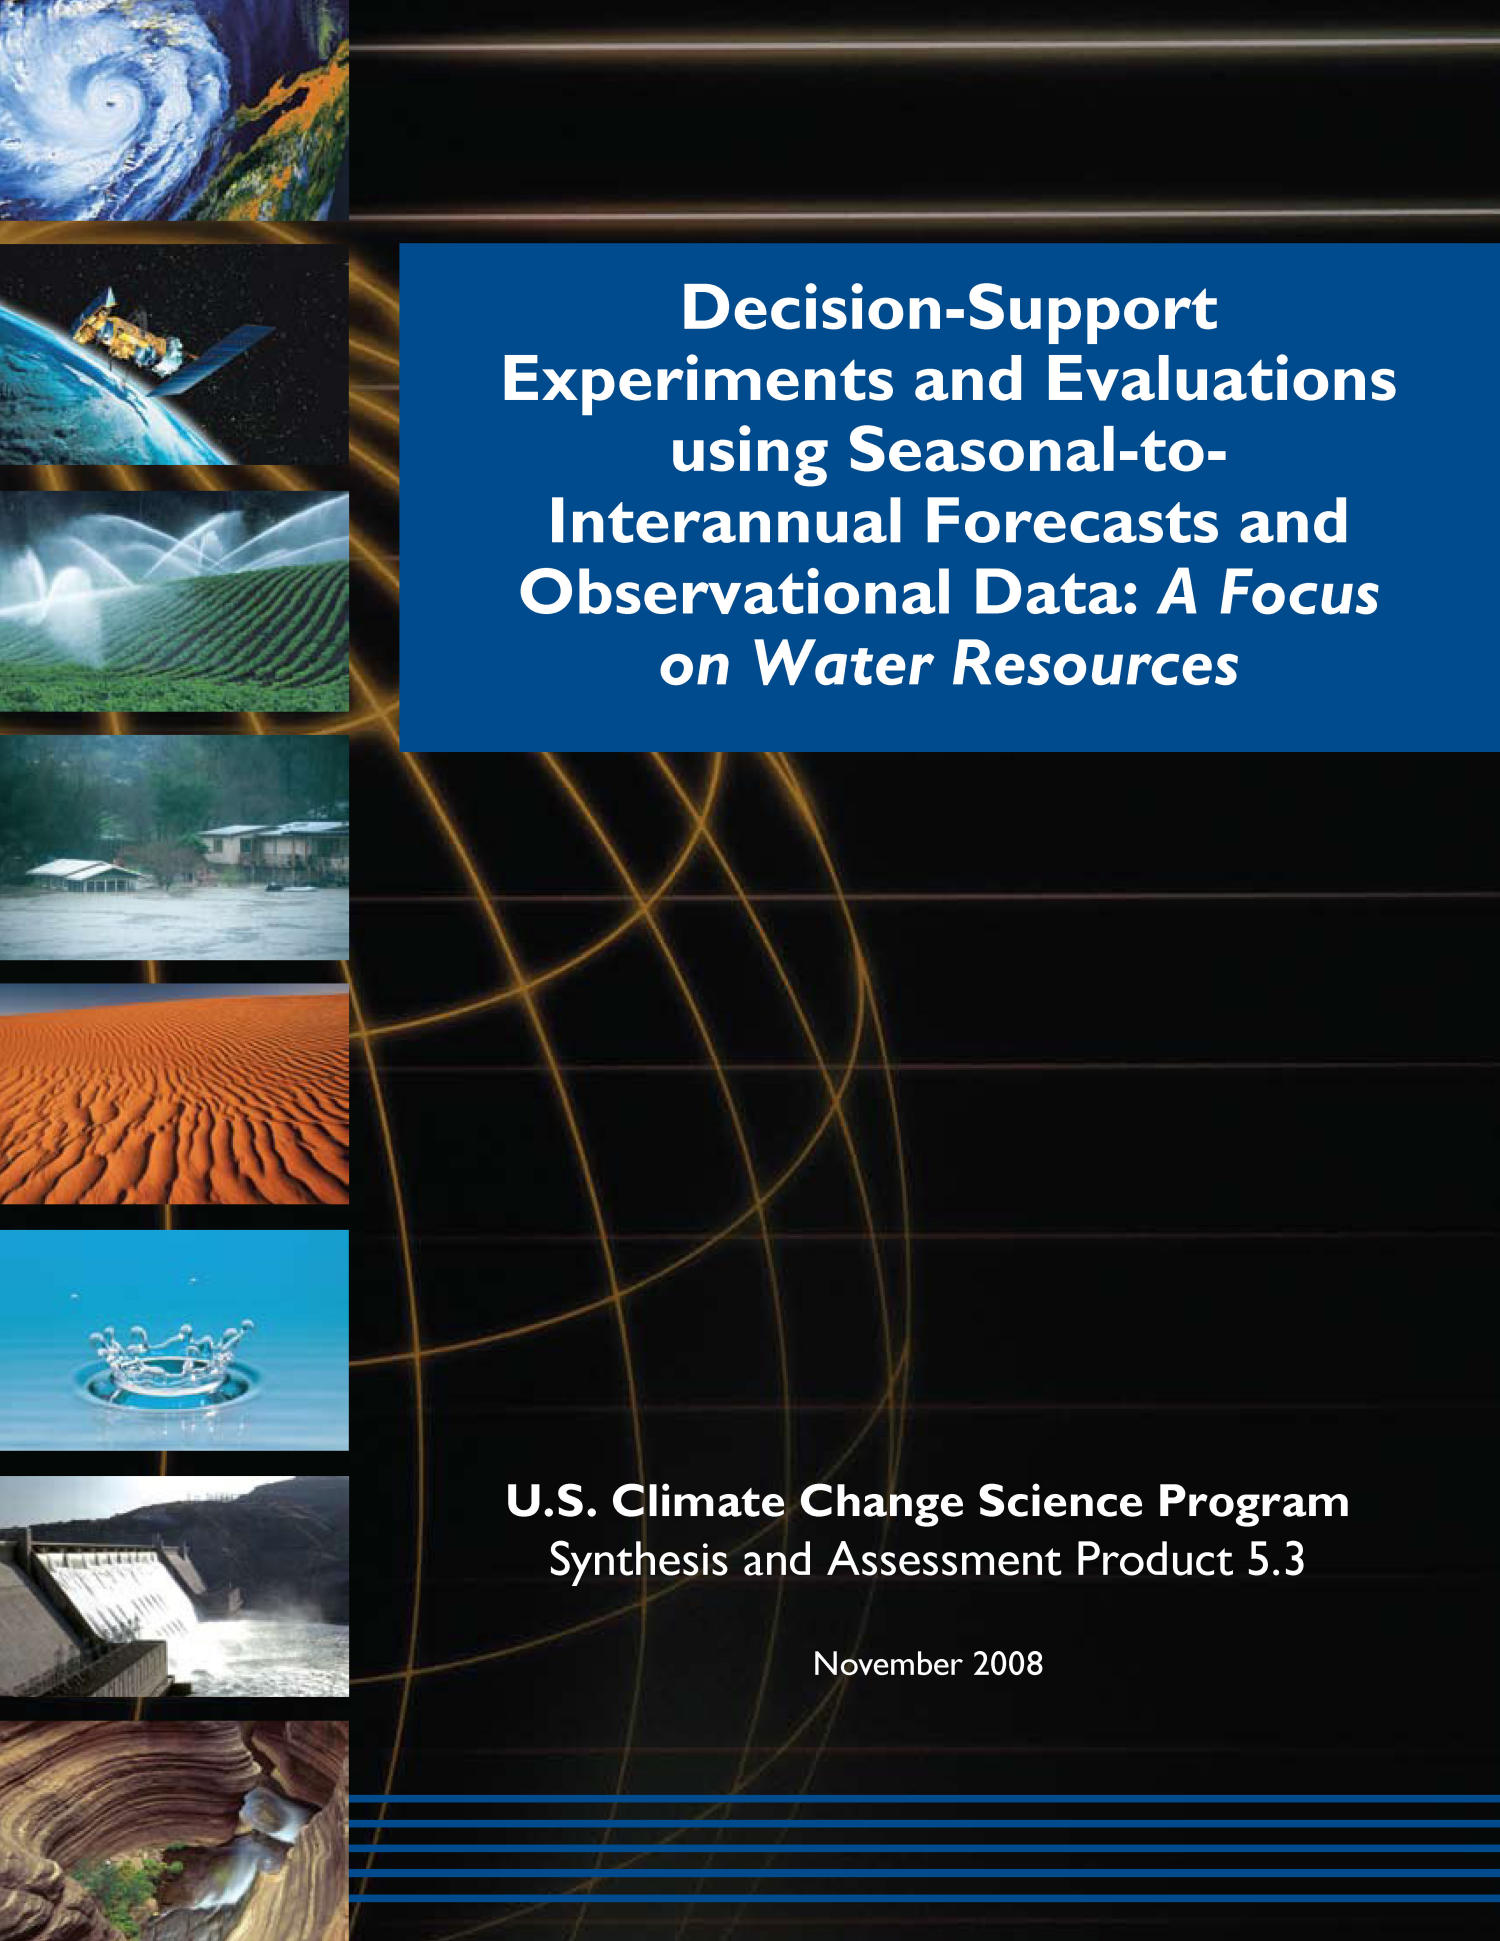 Decision-Support Experiments and Evaluations using Seasonal-to-Interannual Forecasts and Observational Data: A Focus on Water Resources
                                                
                                                    Front Cover
                                                